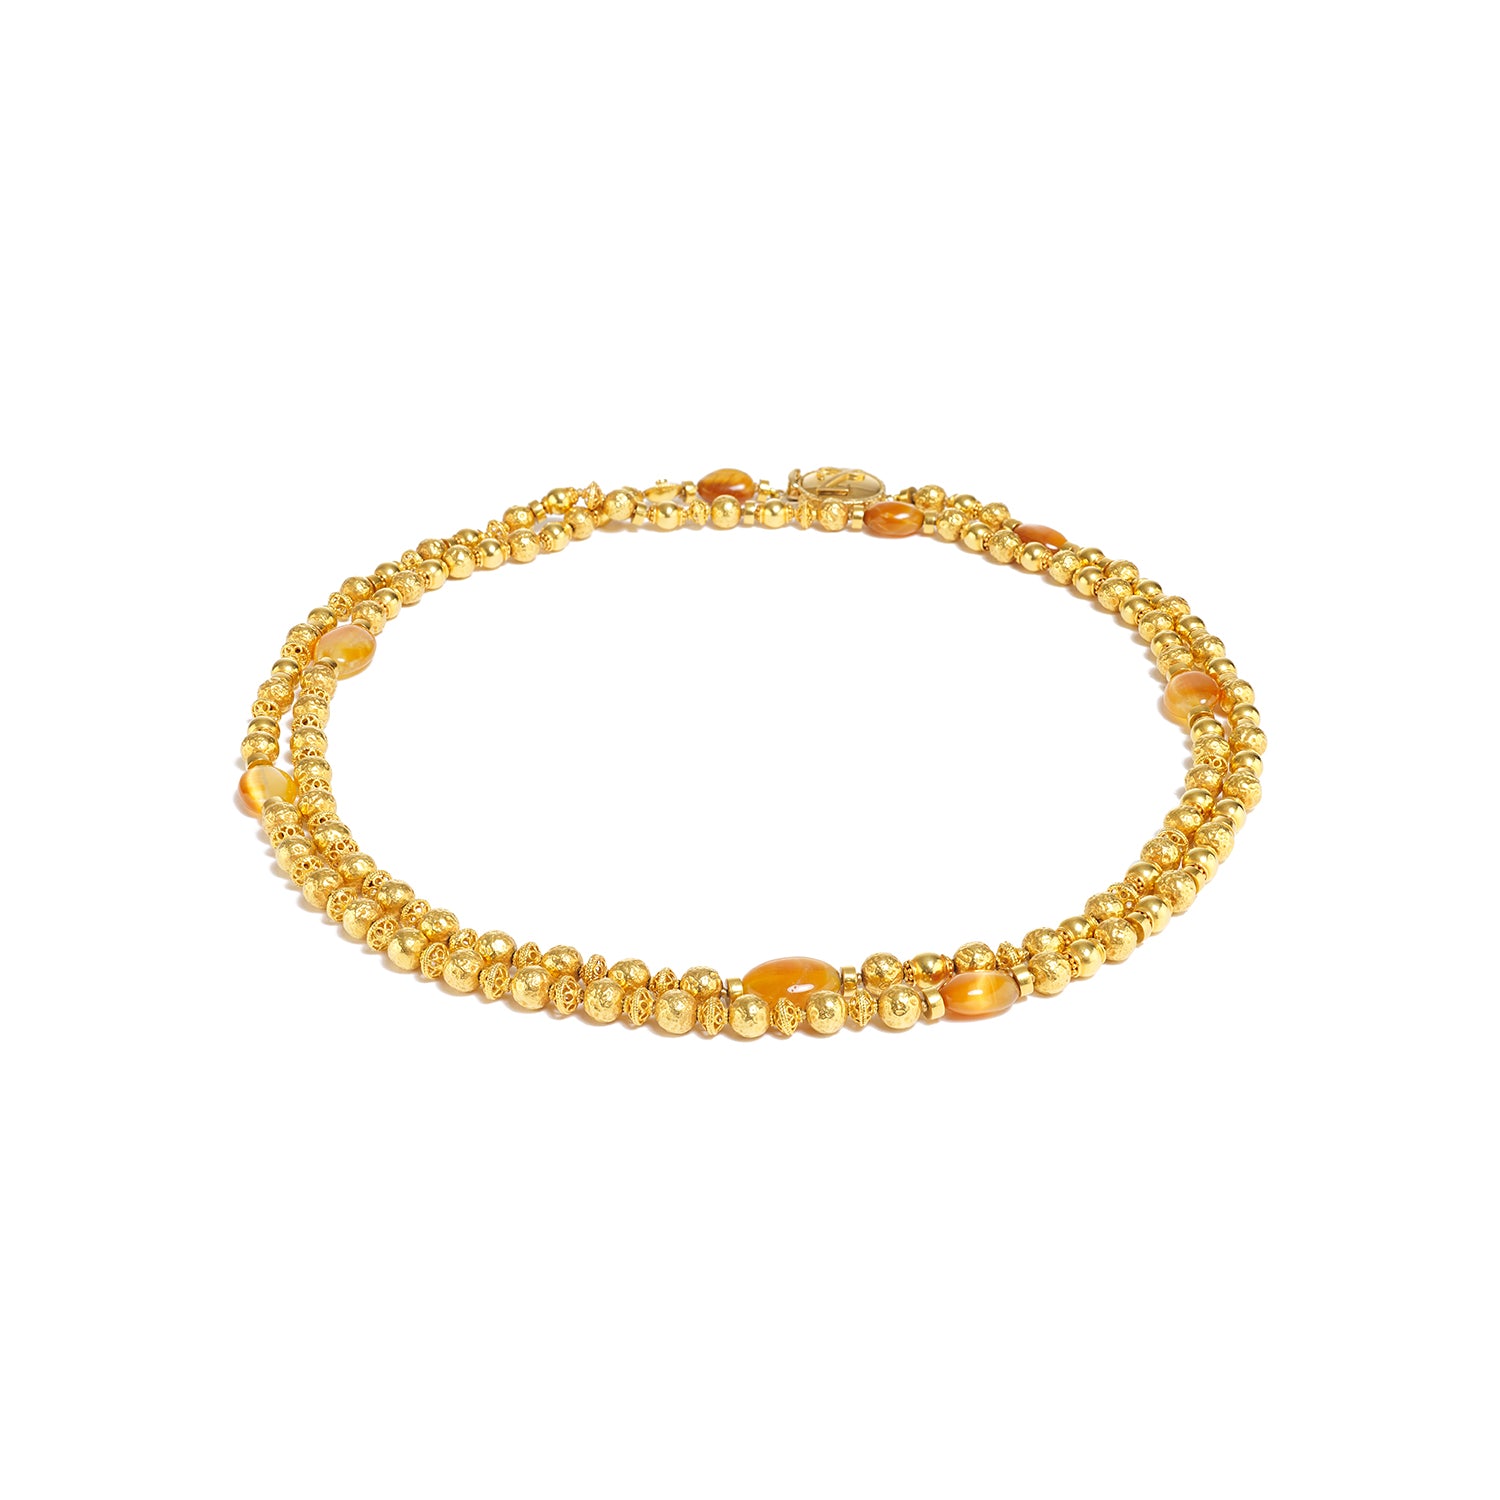 Gold and Golden Opal Necklace